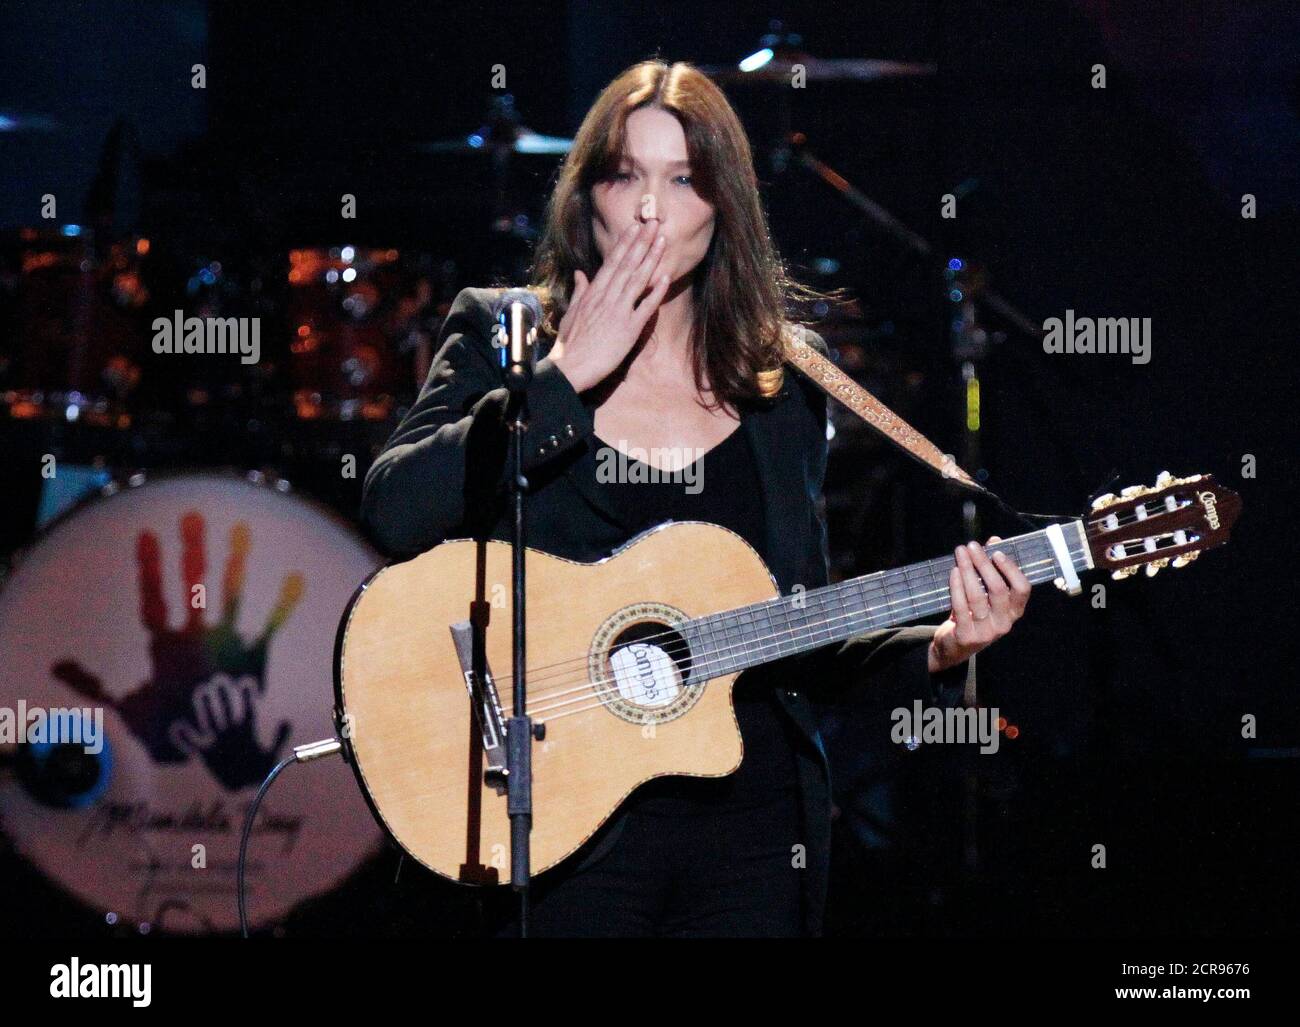 Carla bruni sarkozy in concert hi-res stock photography and images - Alamy